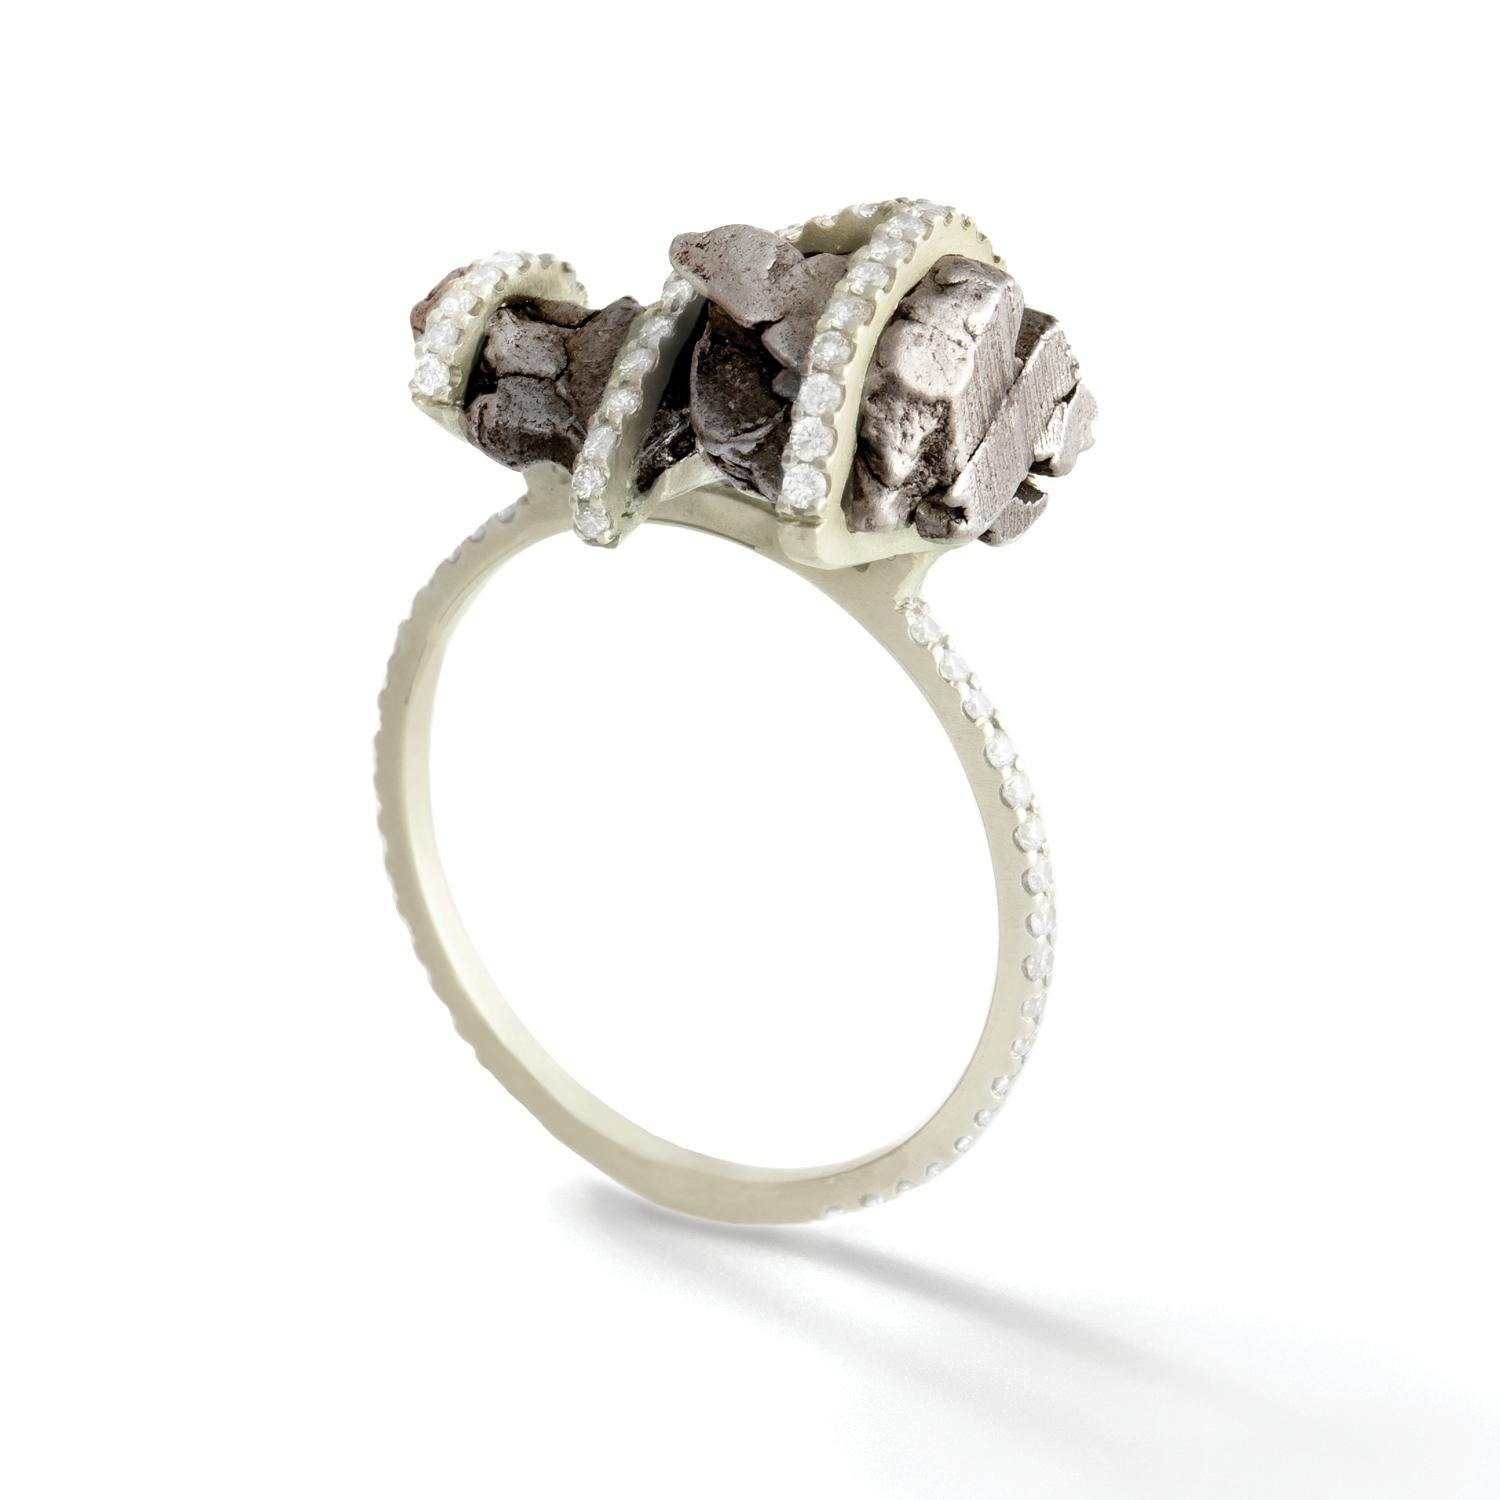 Sikhote-Alin meteorite specimen and white diamond ring, 18 carat recycled white gold, 0.61 TCW

Inspired by the intersection of Earth and Cosmos, this ring encages a natural undulating specimen of meteorite in a frame of white diamond pavé